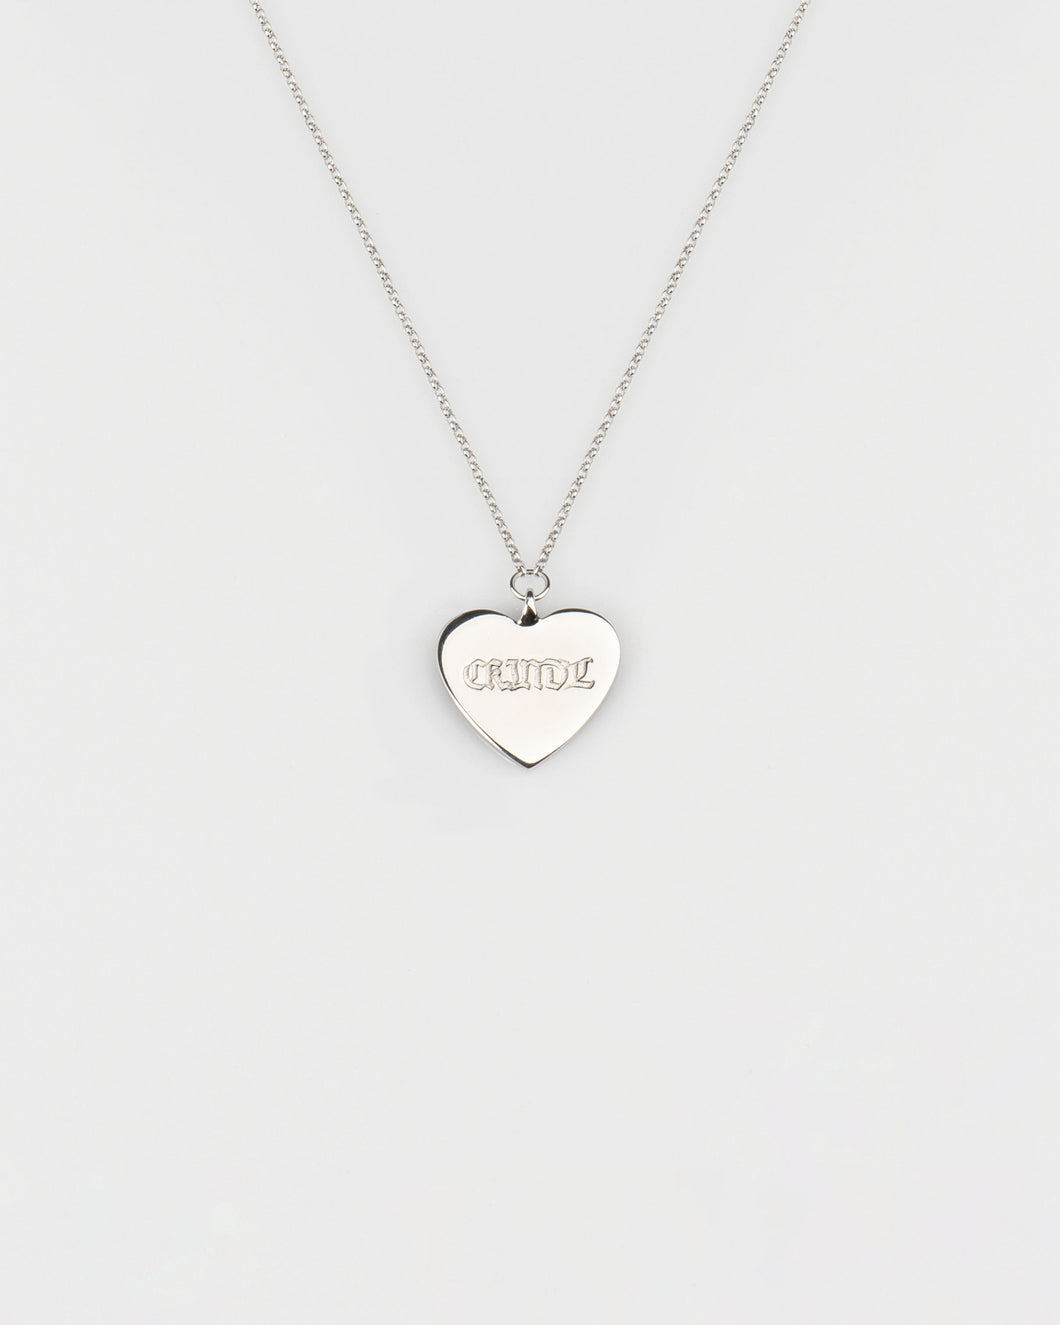 CHANGE OF HEART PENDANT - POLISHED SILVER